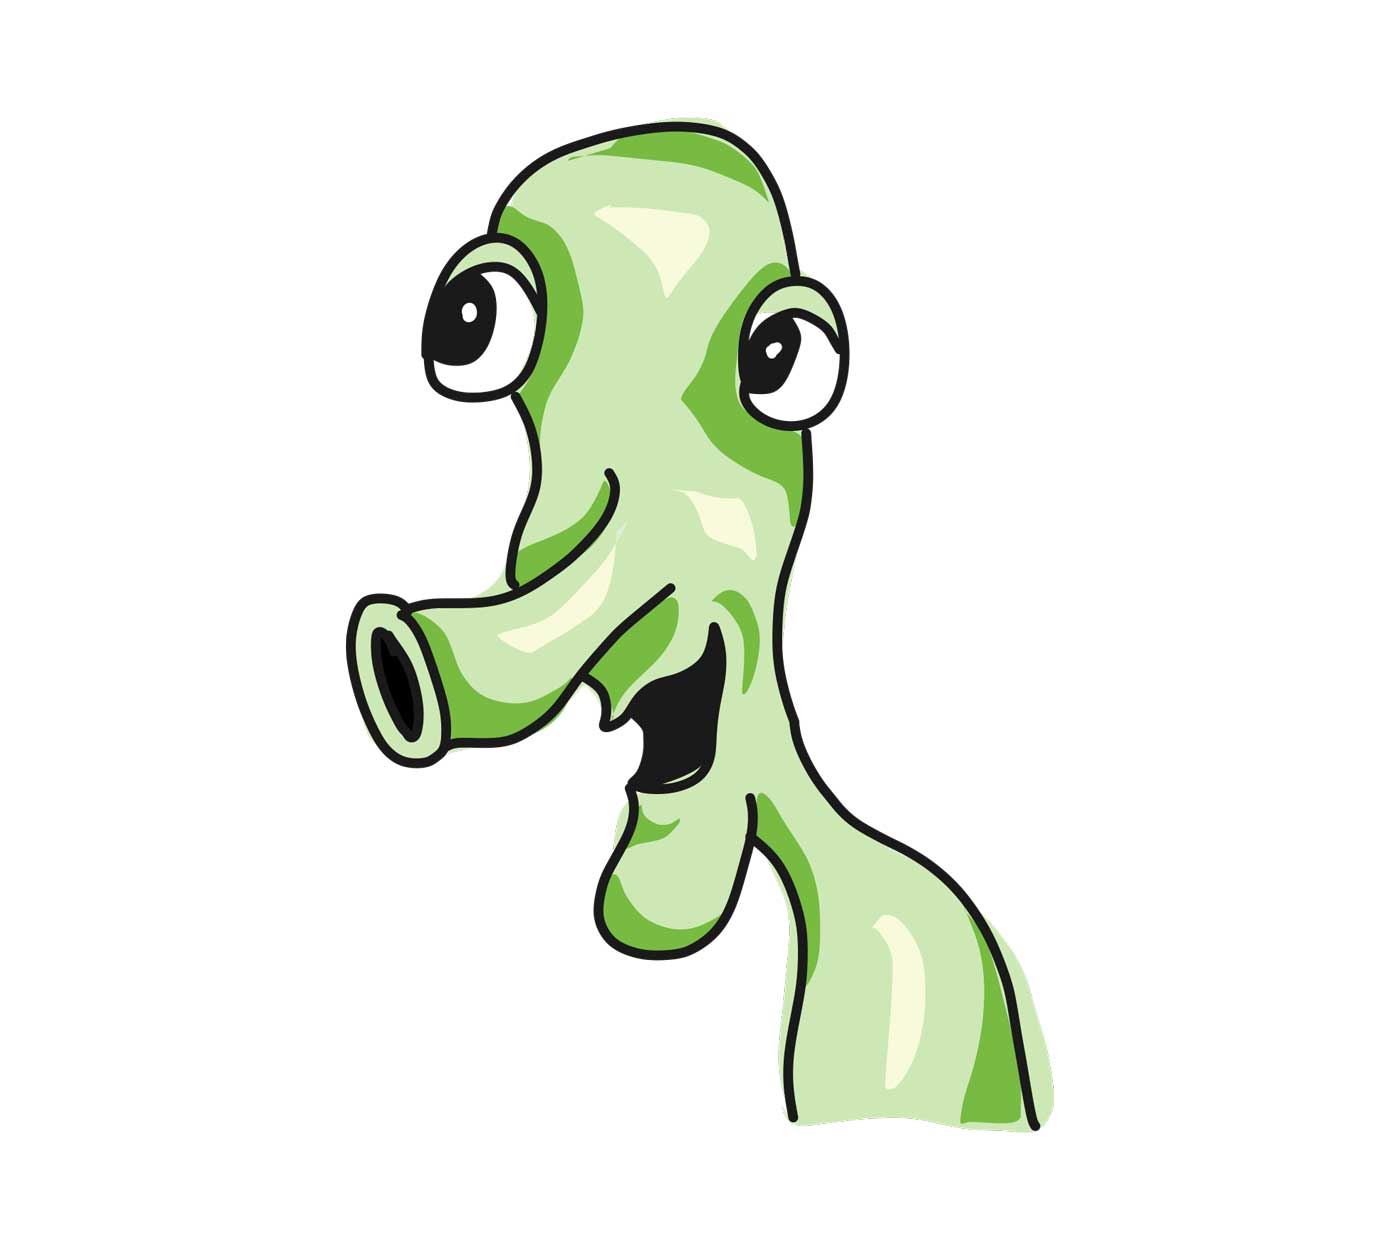 A green monster that has no teeth and a hose-like nose!